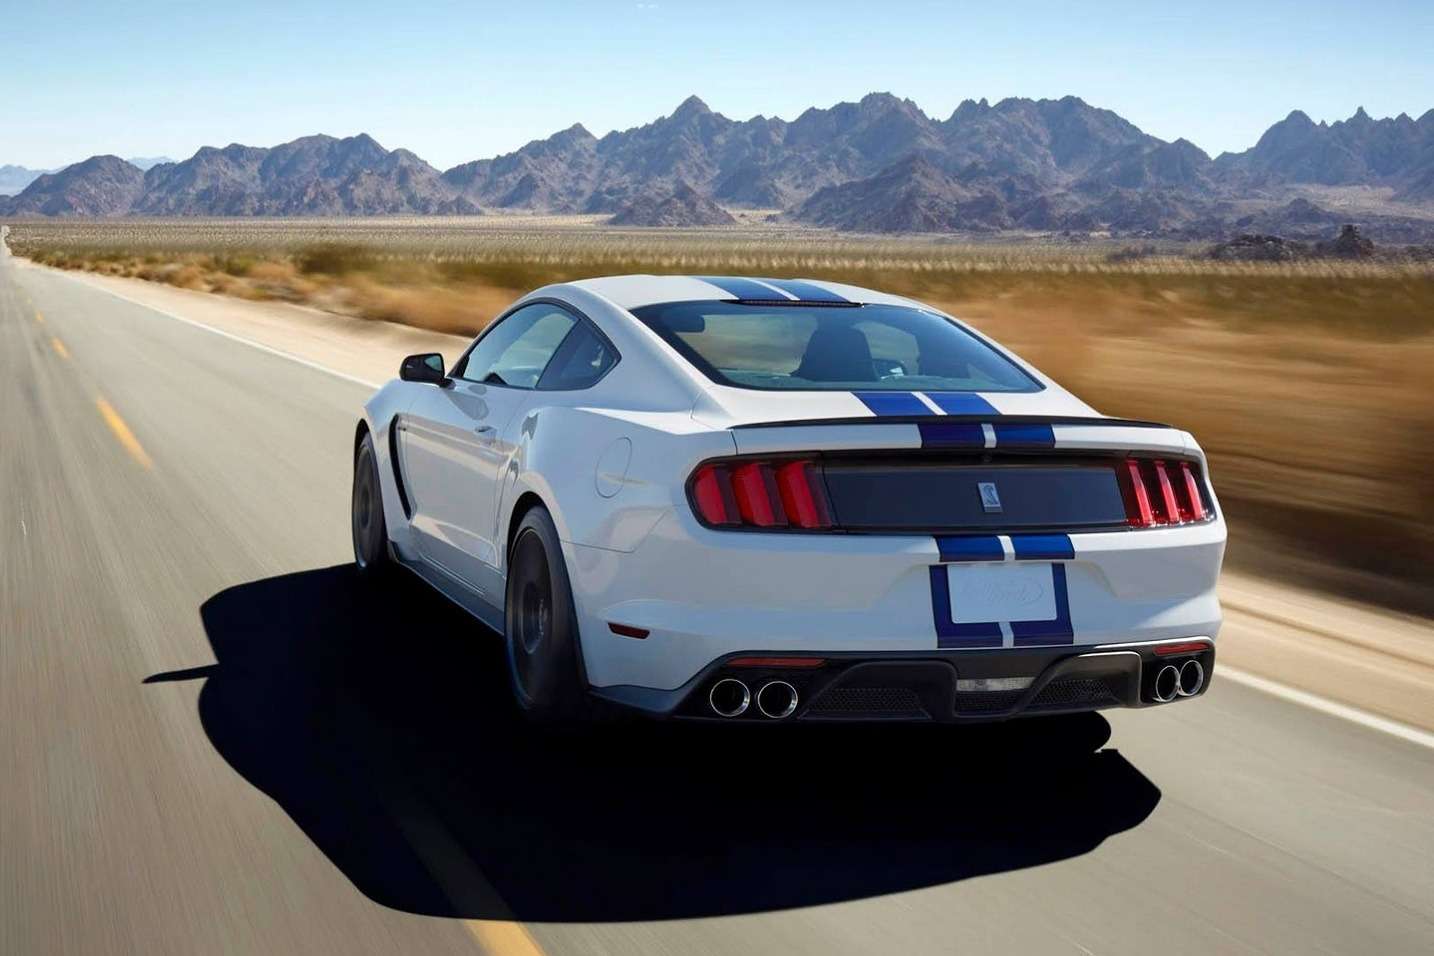 New-Ford-Mustang-Shelby-GT350-12